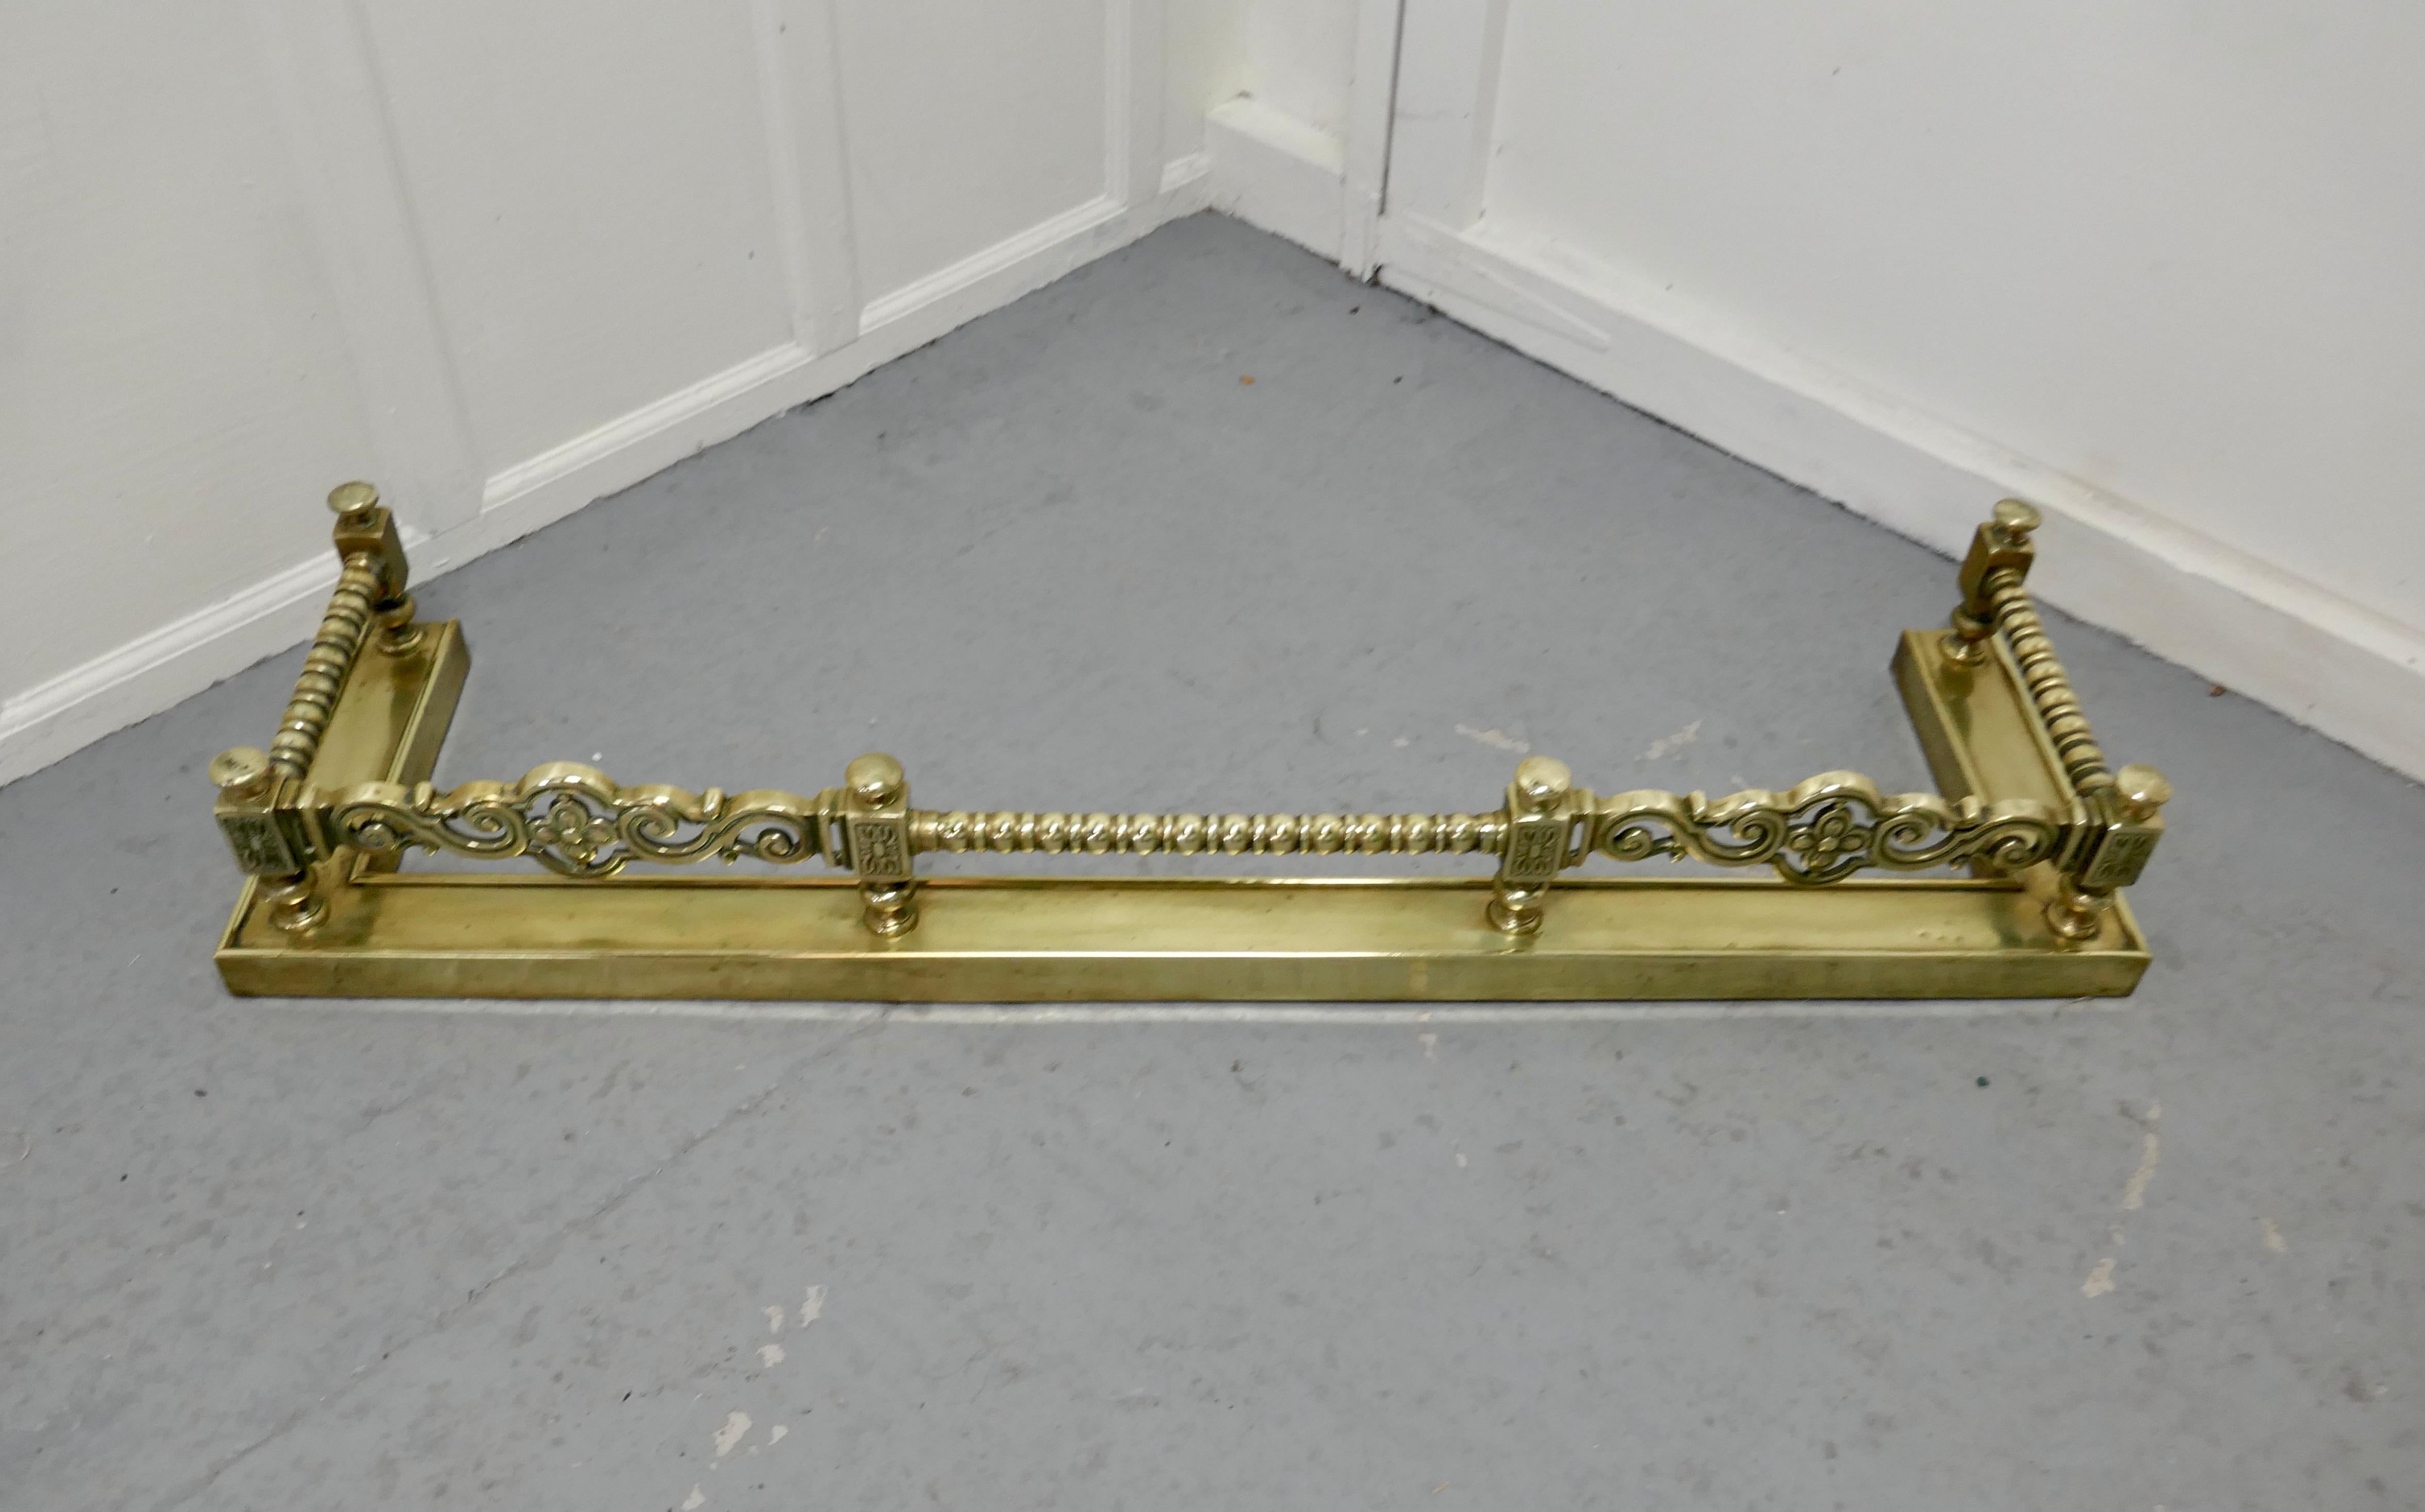 Superb quality and design 19th Century heavy brass fender

This is a superb quality brass fender it has a deep base and chunky twist spindles, this is one of the heaviest and finest quality fenders 
The Fender has delightfully crafted decoration